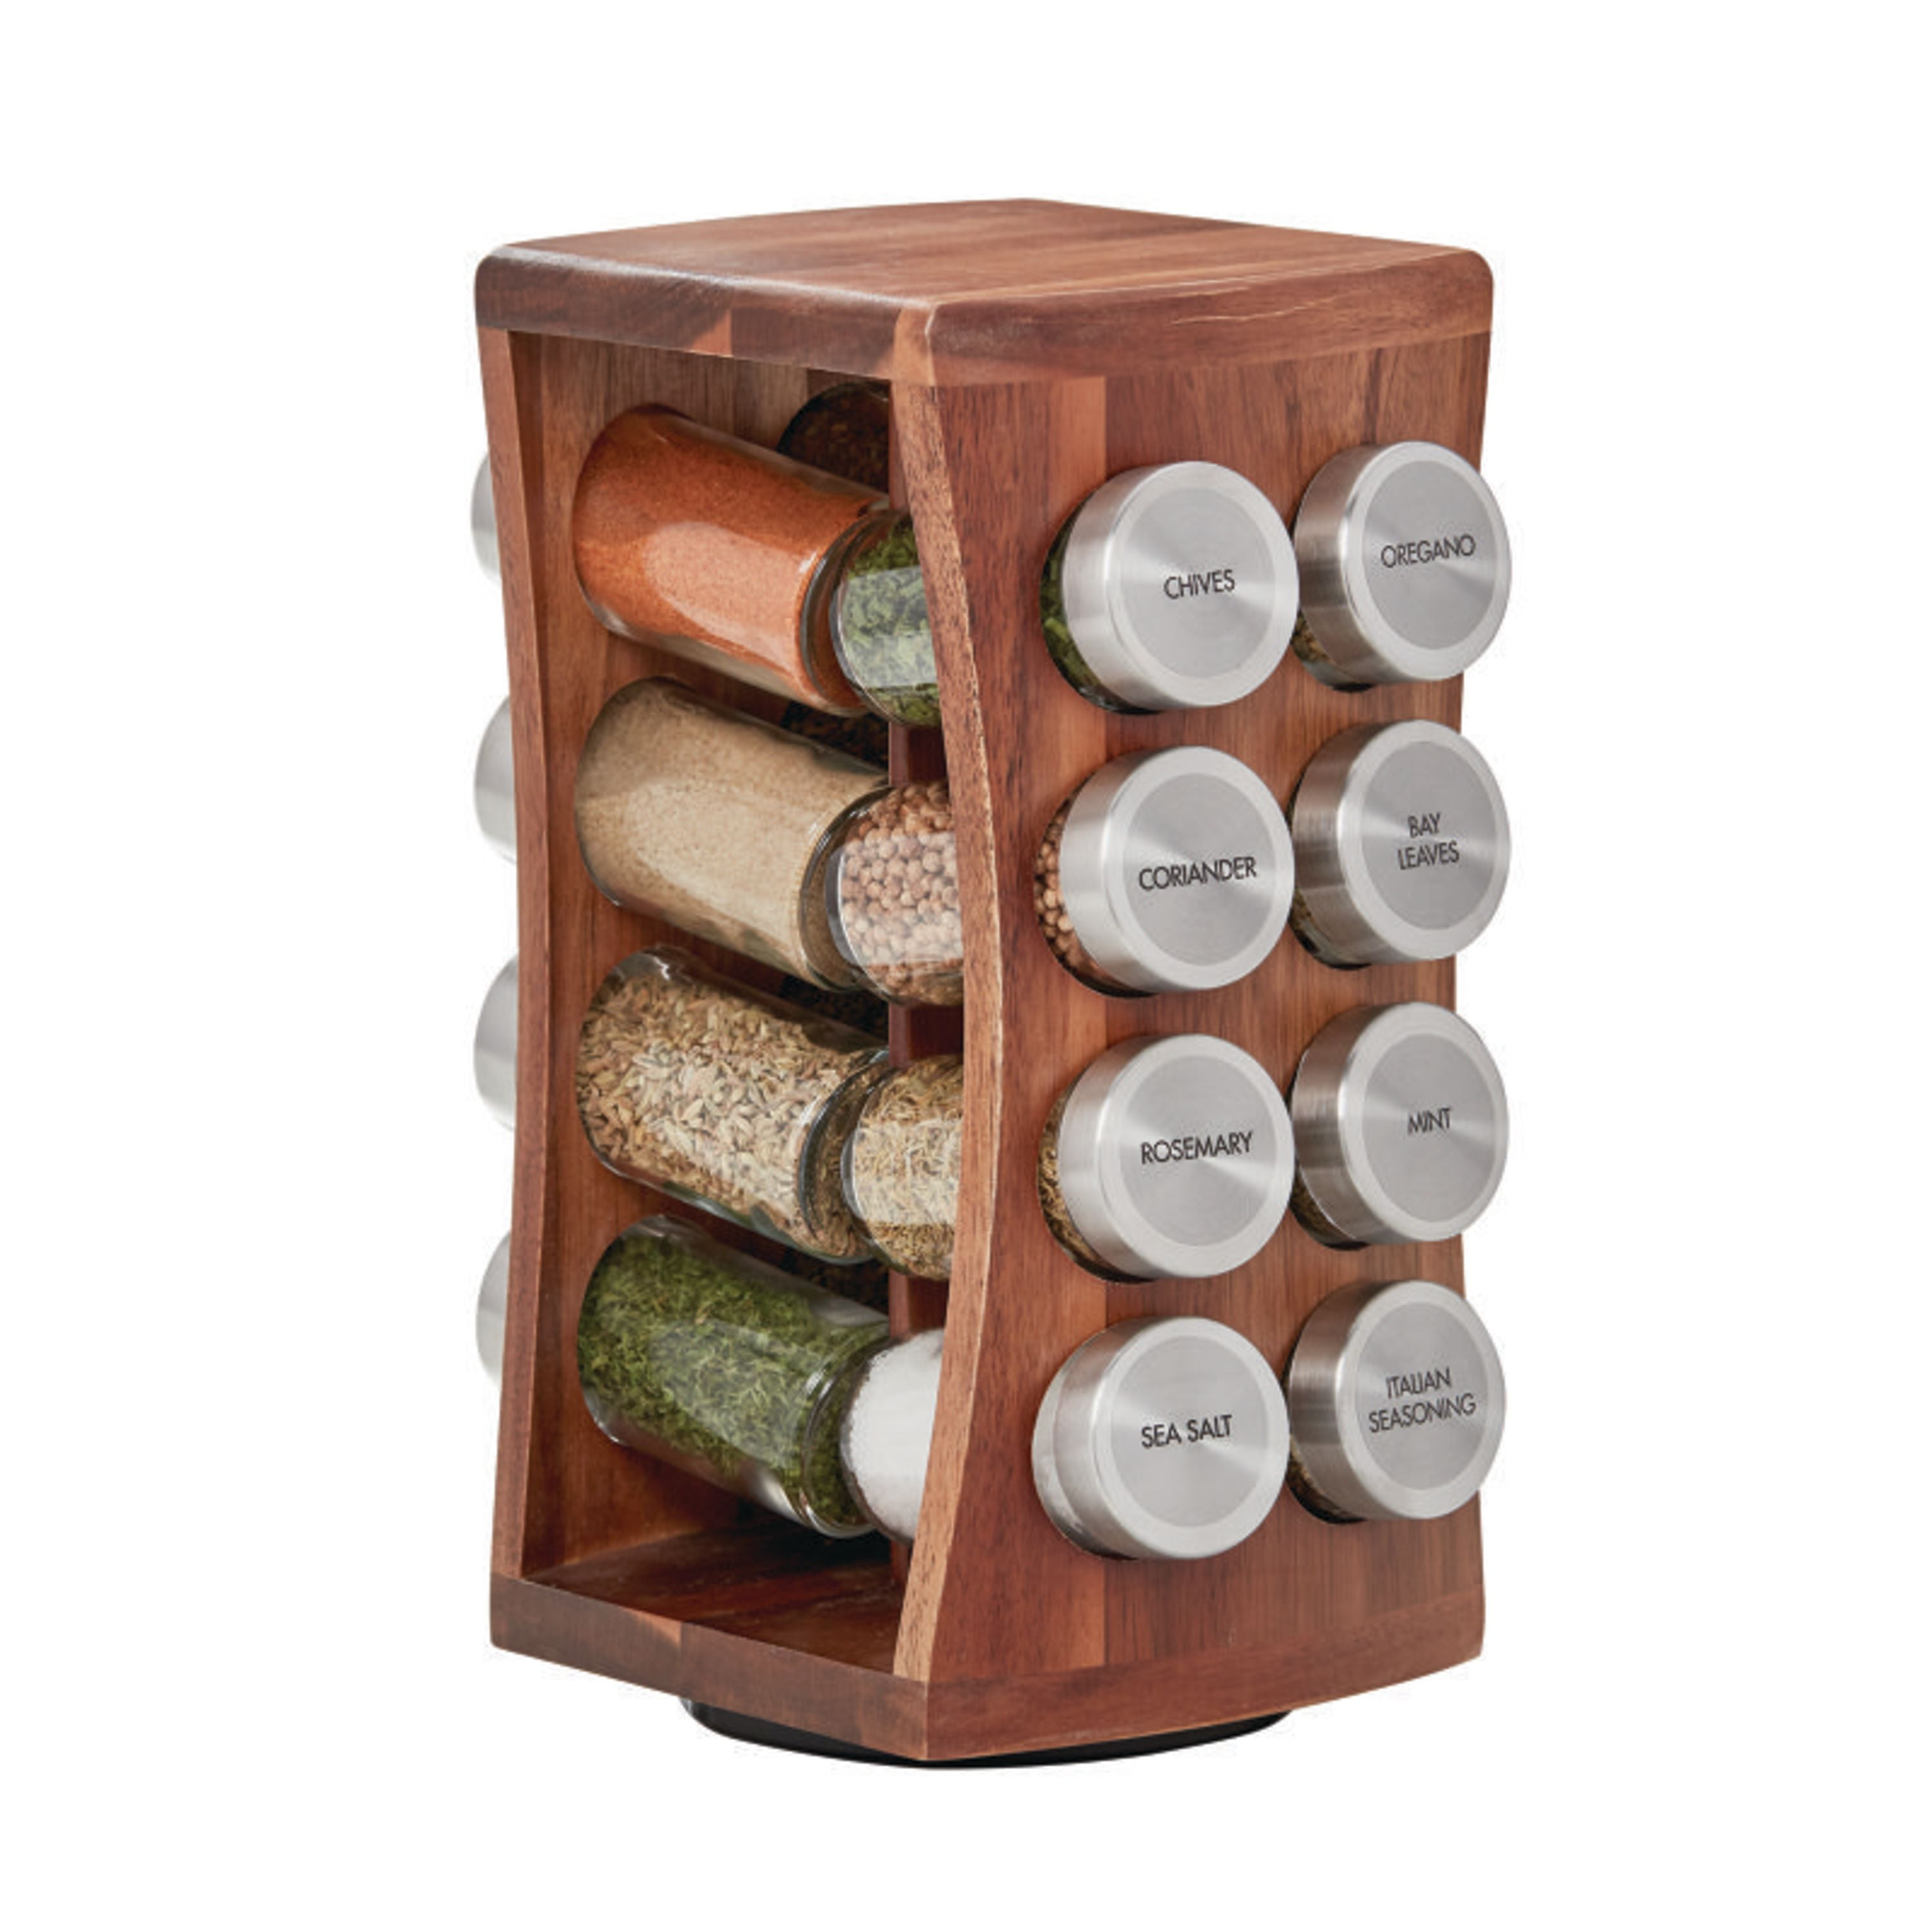 Spice Rack Carousel 16 8 Jars Wooden Stainless Steel Rotating Kitchen Storage